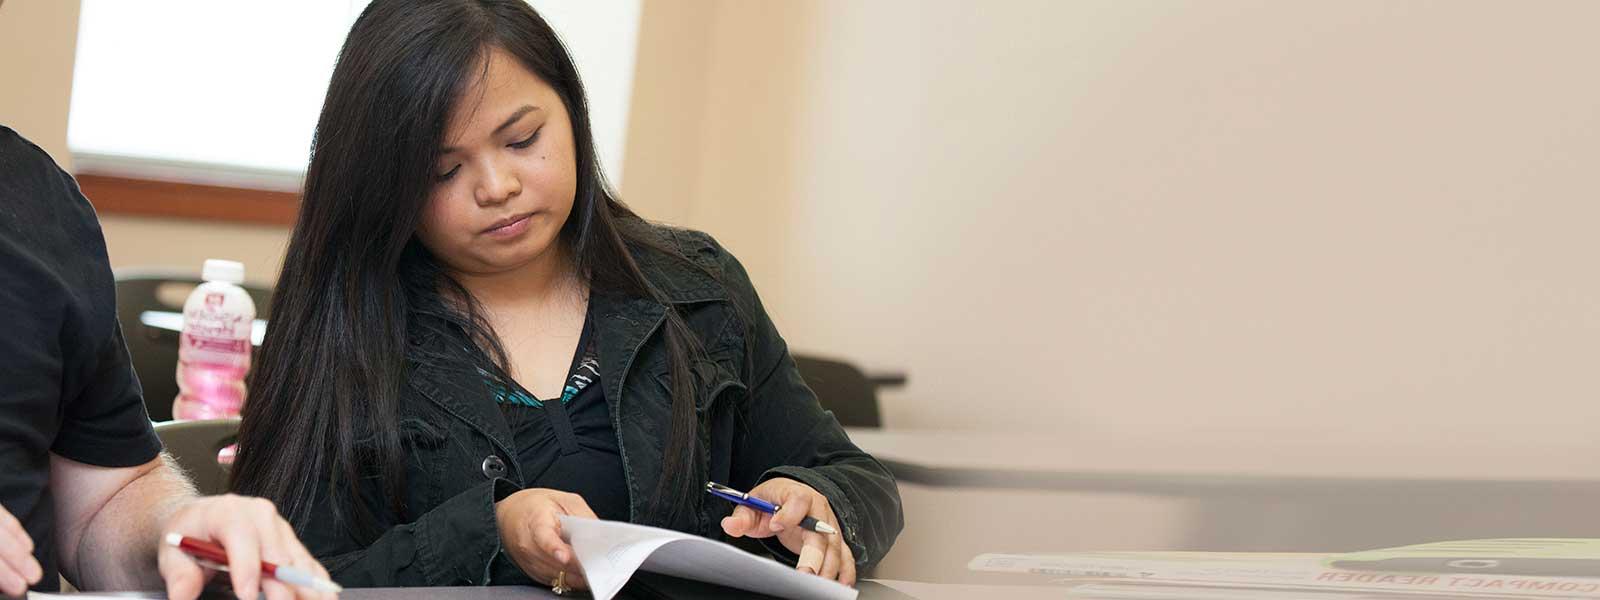 female student looks over notes